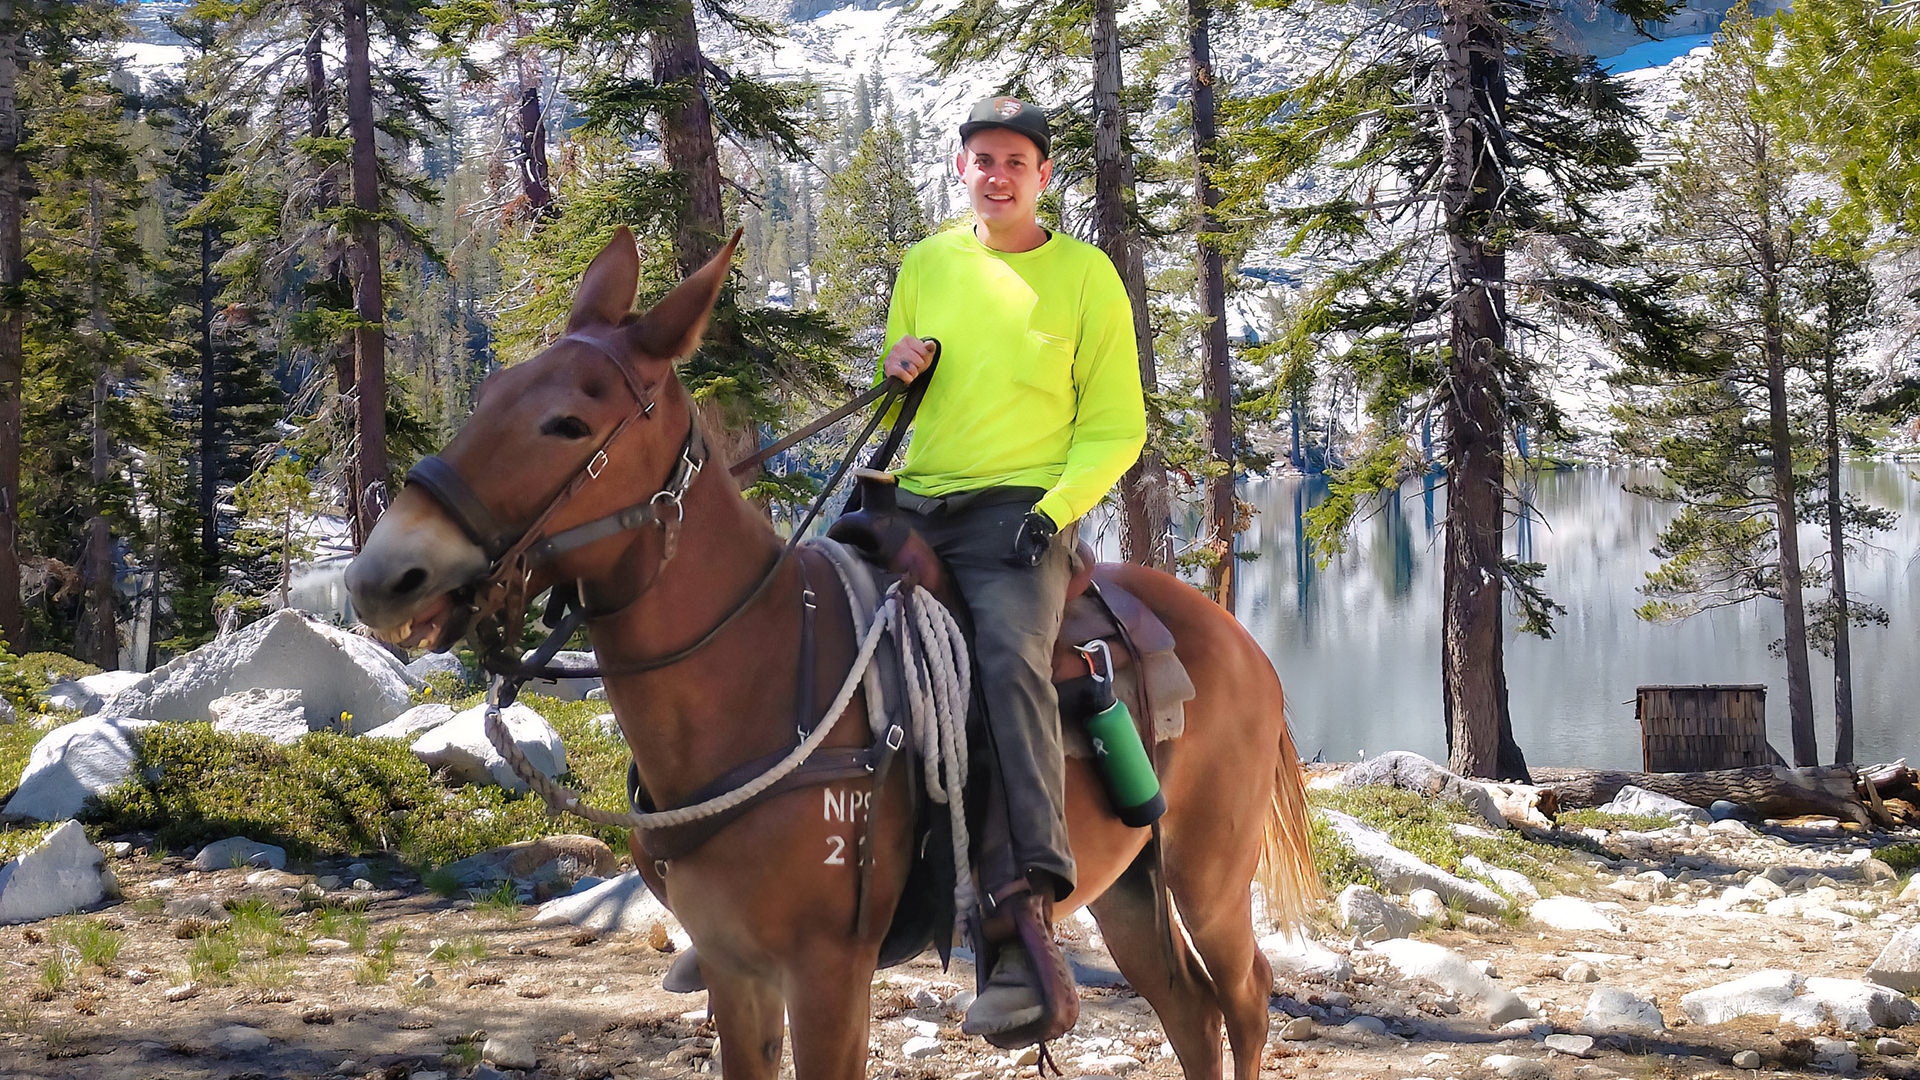 Austin Anderson on his horse in the National Park where he works as an tree faller